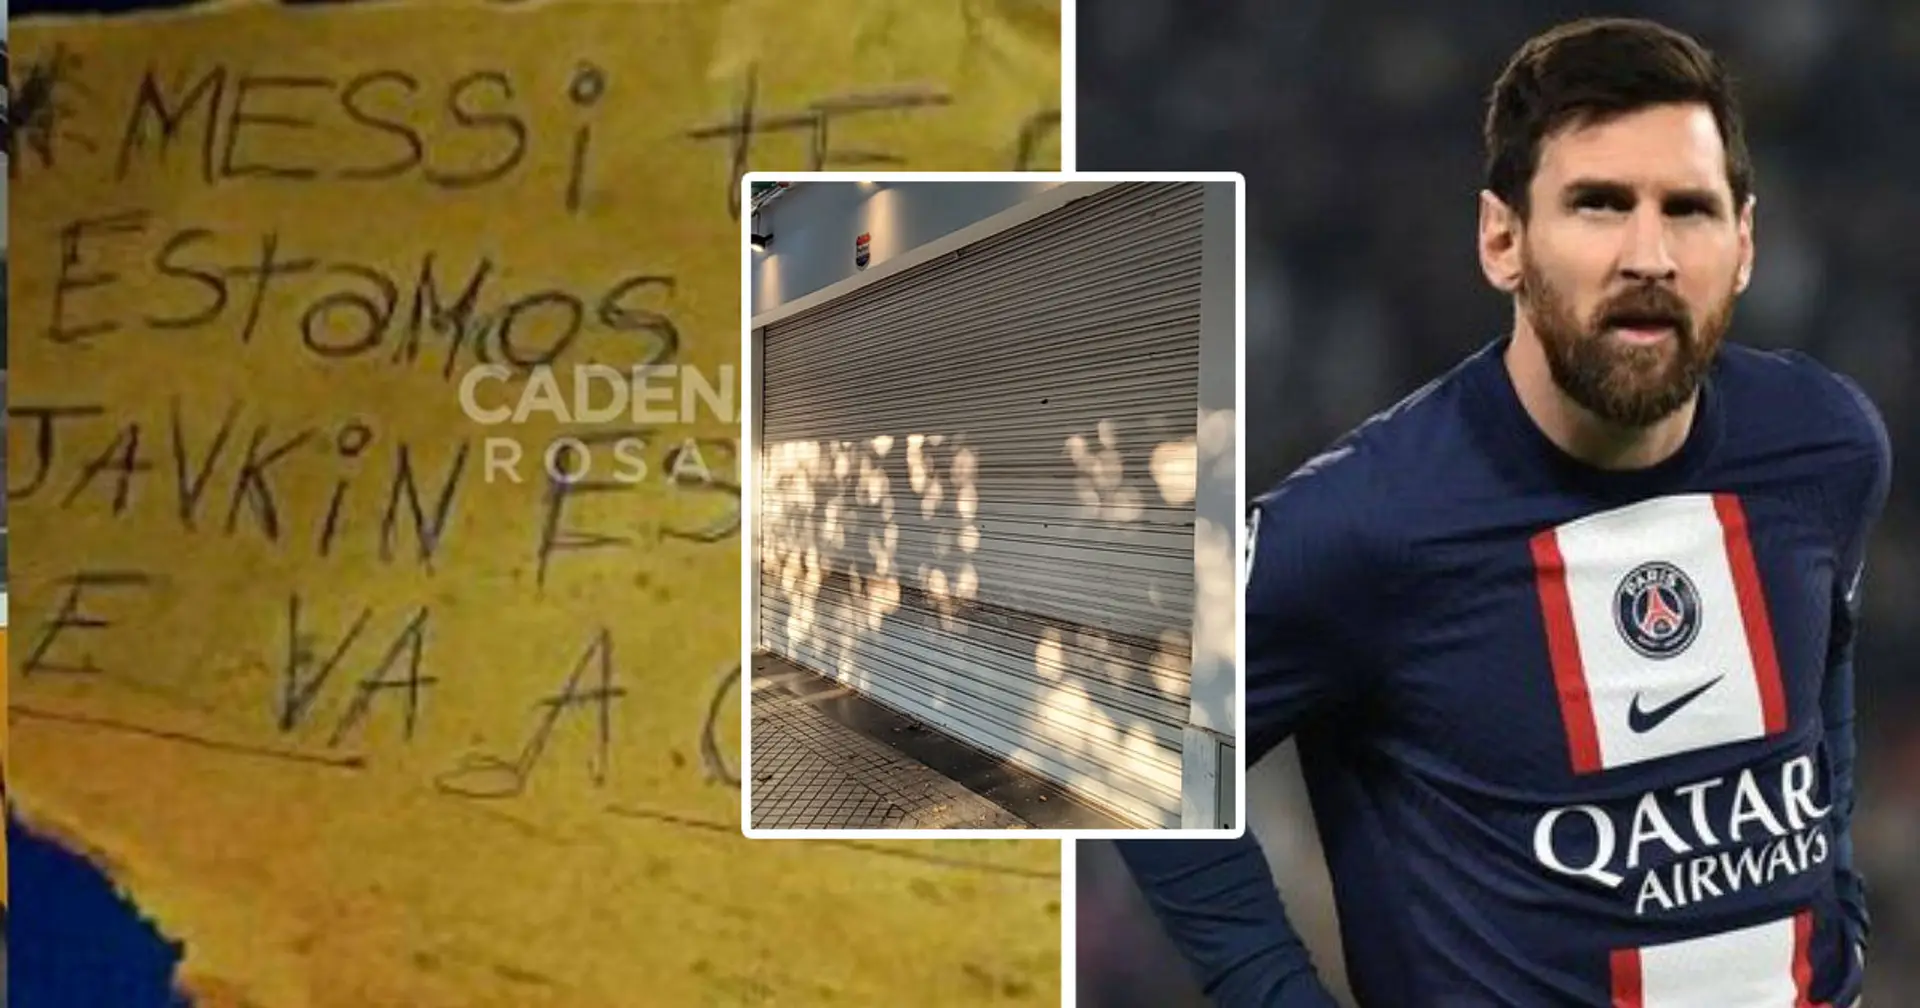 'We are waiting for you': Messi threatened as family supermarket hit with 14 gunshots back in Argentina